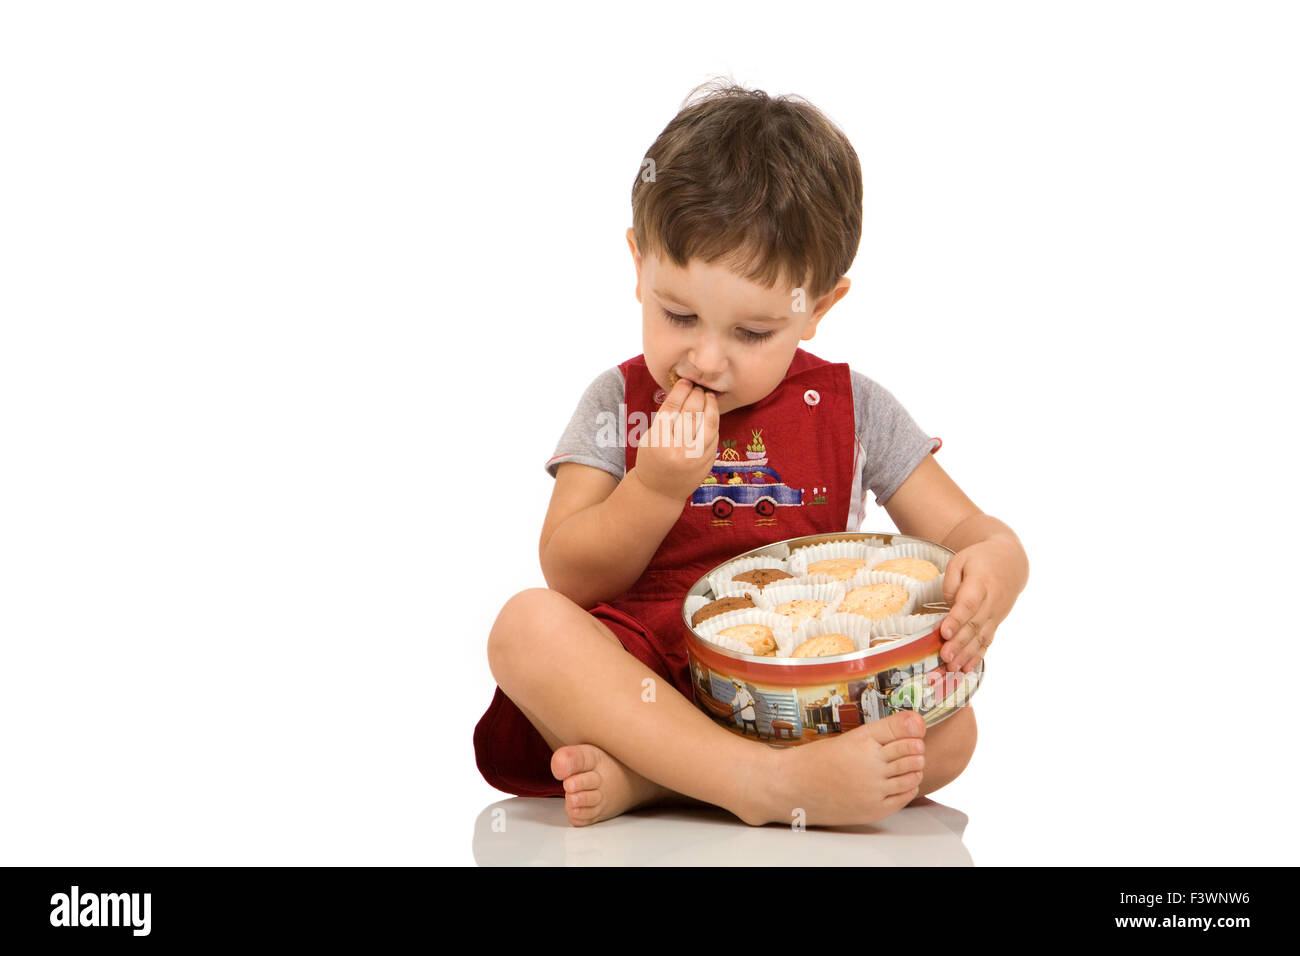 Boy tests biscuits Stock Photo